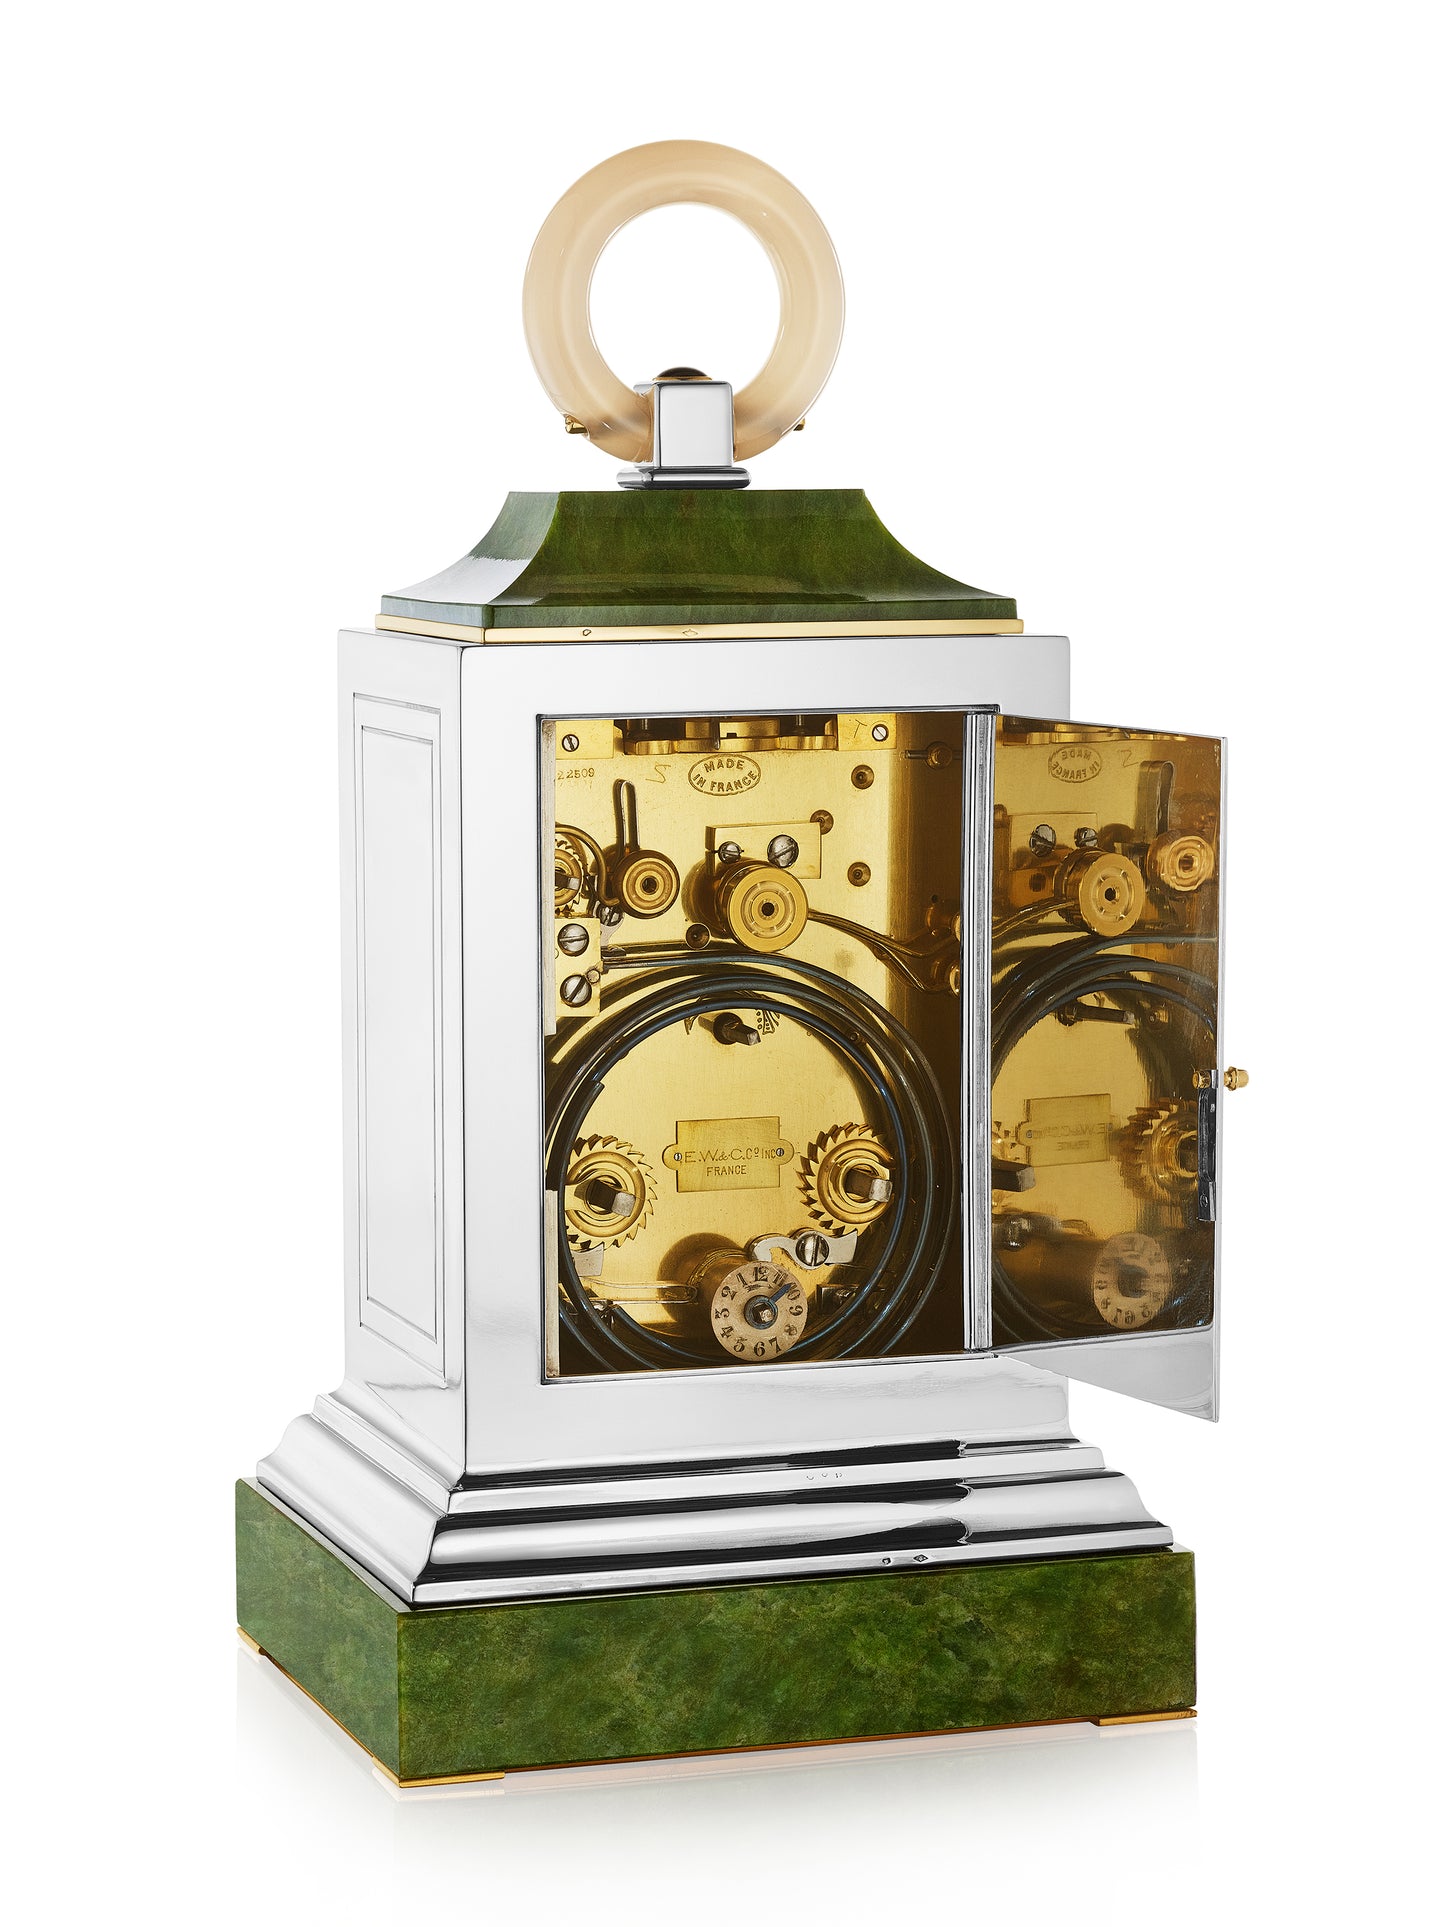 Art Deco Nephrite, Chalcedony, Sterling Silver and Gold Clock by Cartier, Paris, circa 1920, Manufactured by Maurice Couet